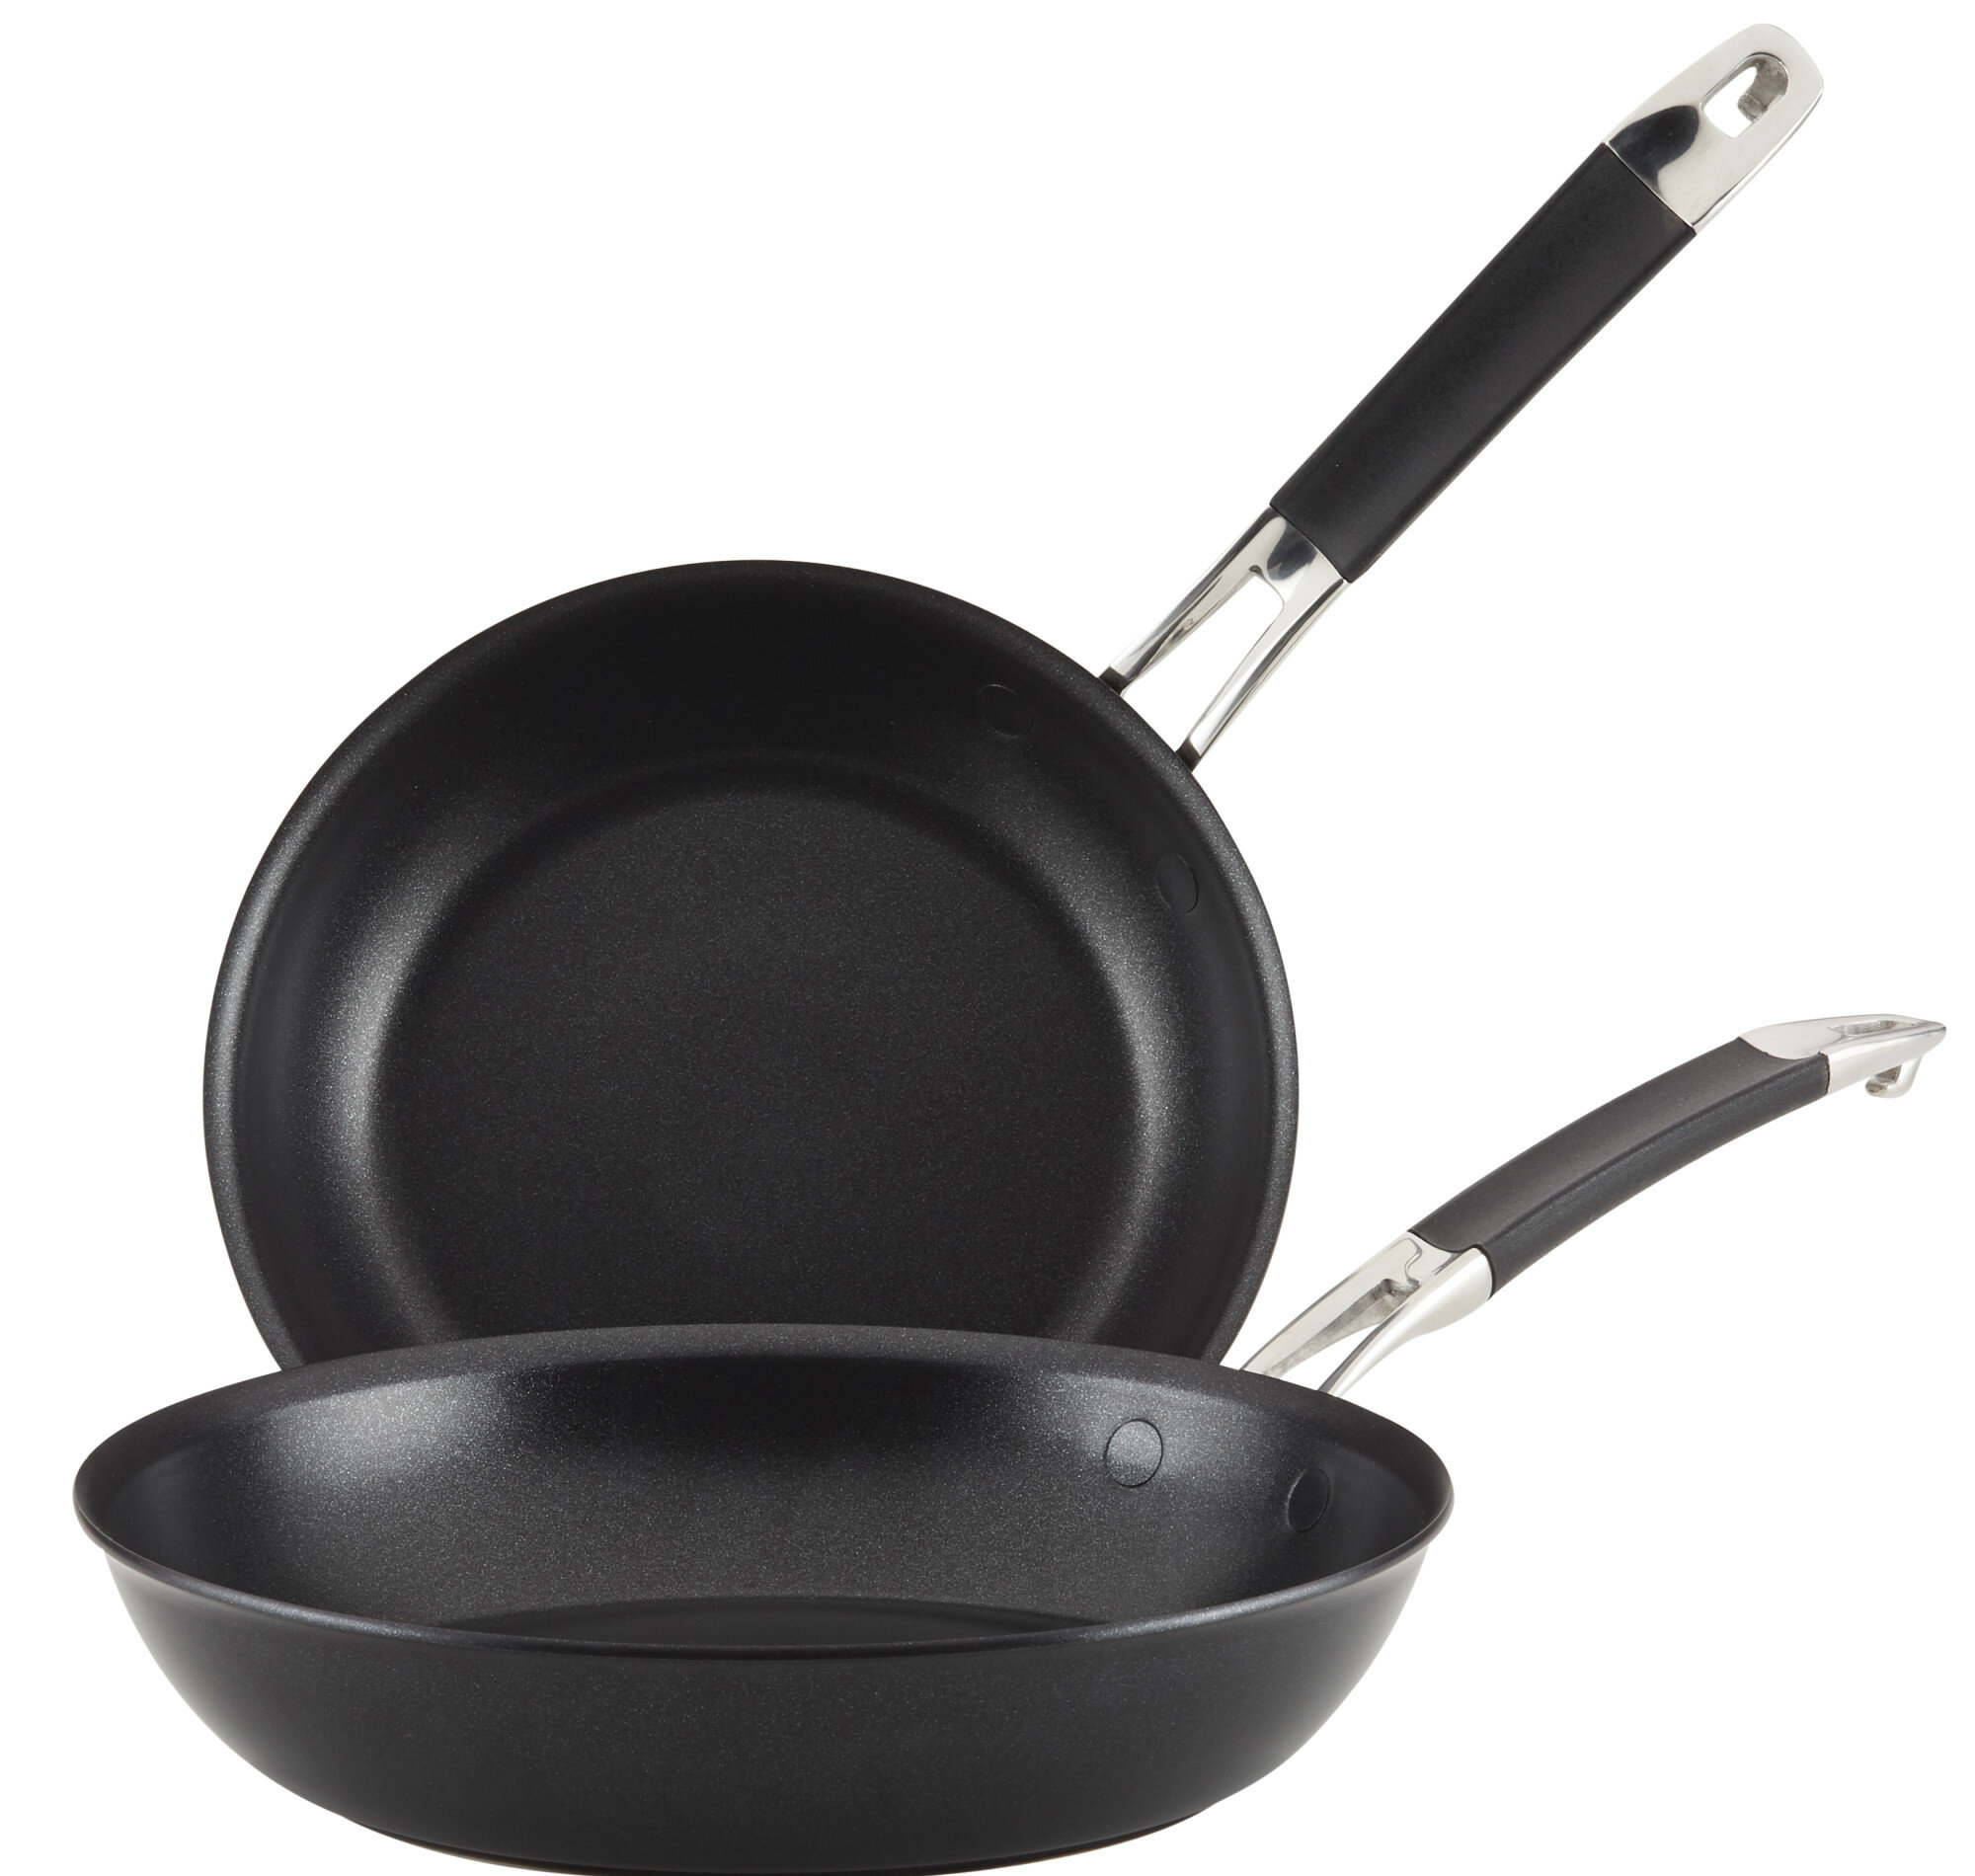 Calphalon Premier Hard-Anodized Nonstick 13-Inch Deep Skillet with